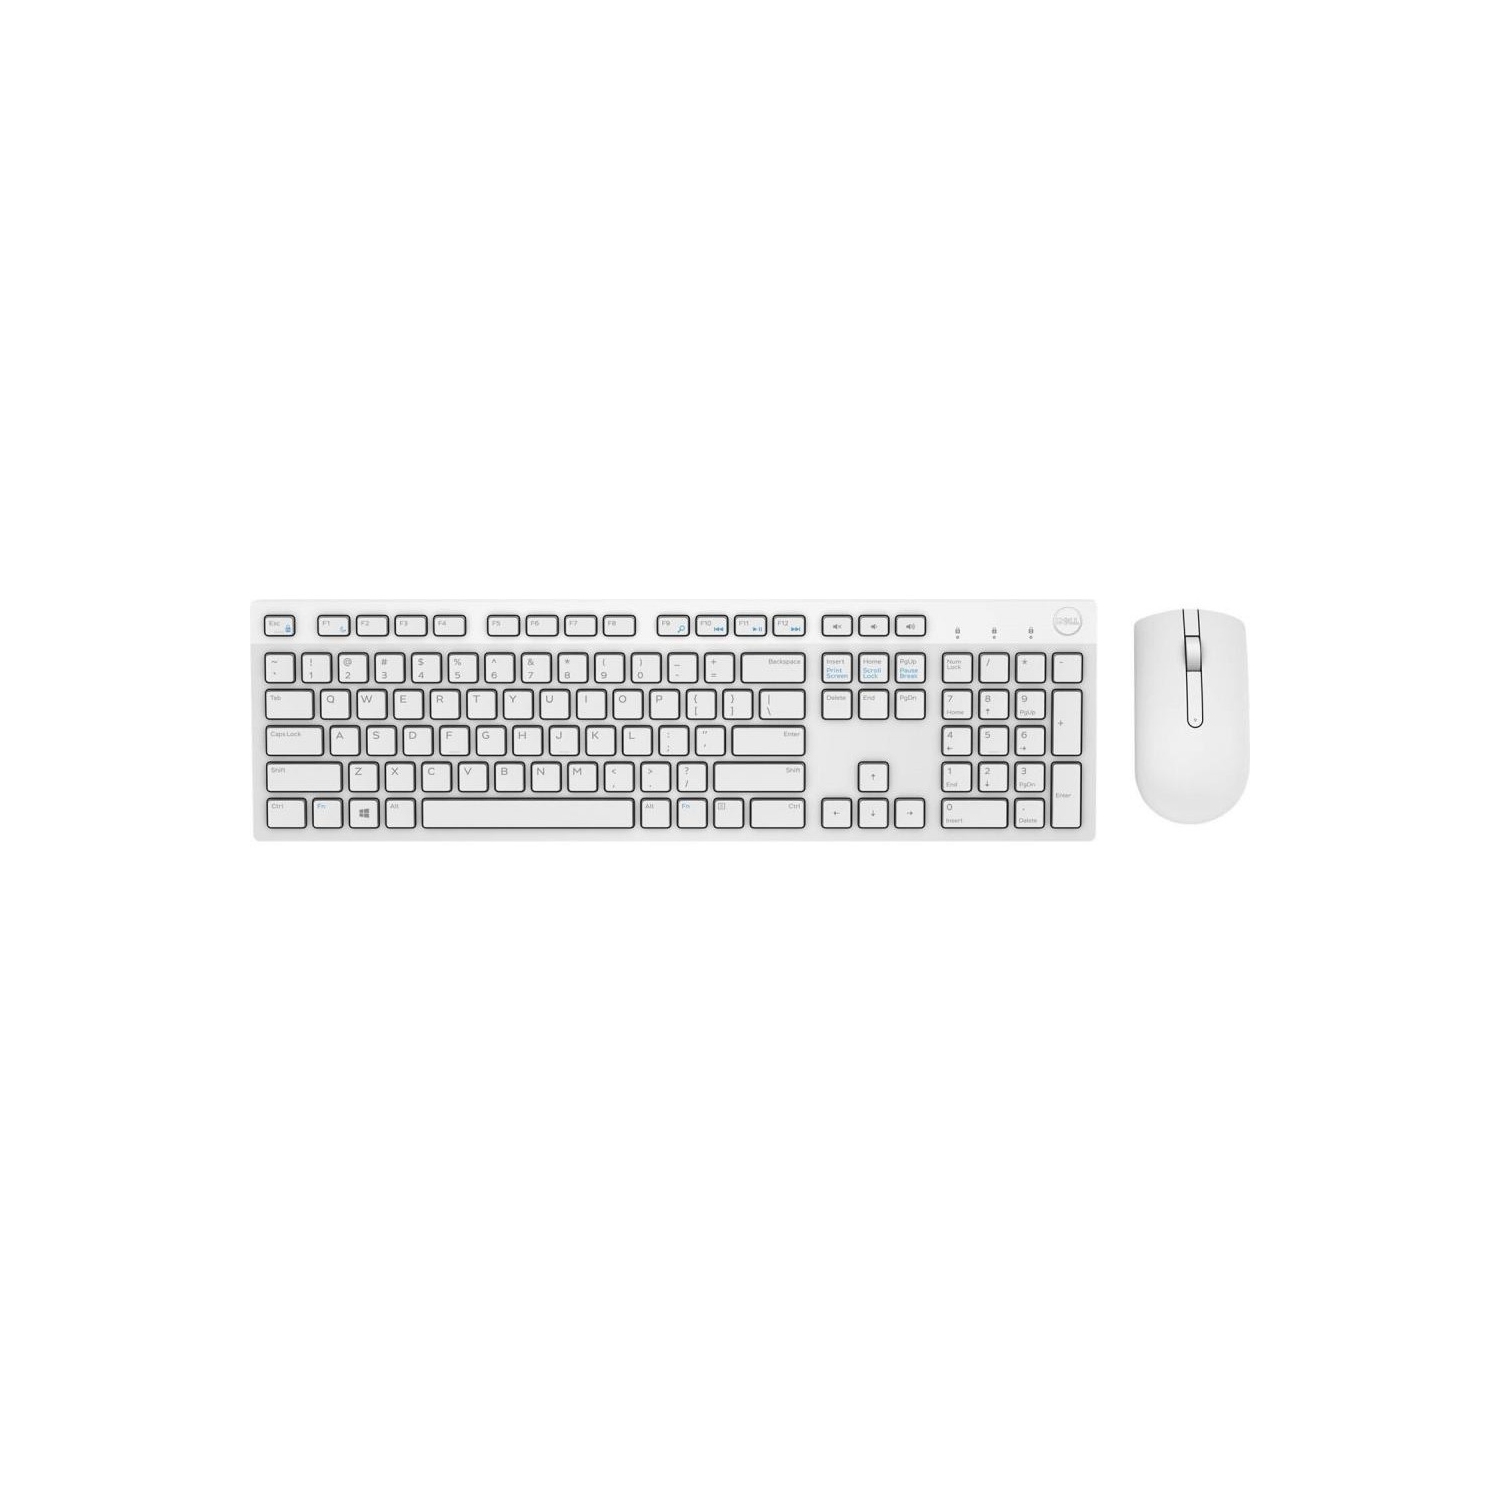 VALUE COMBO - Dell KM636 Wireless Keyboard and Mouse Combo (White) - English Version